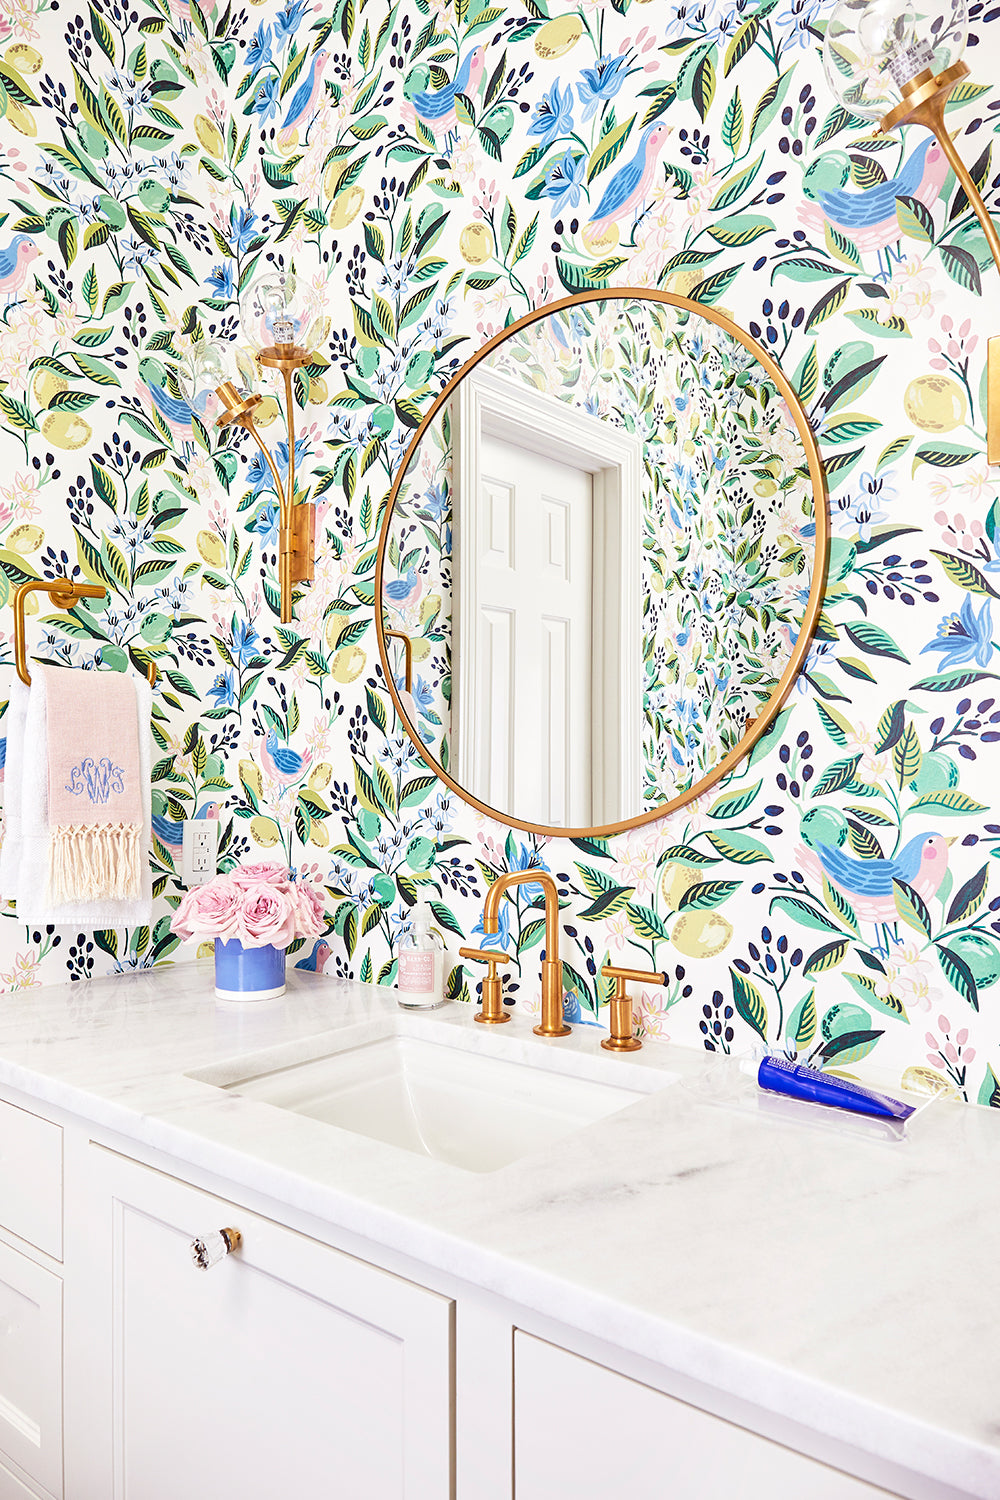 Wall-to-Wall Style with Designer Wallpaper